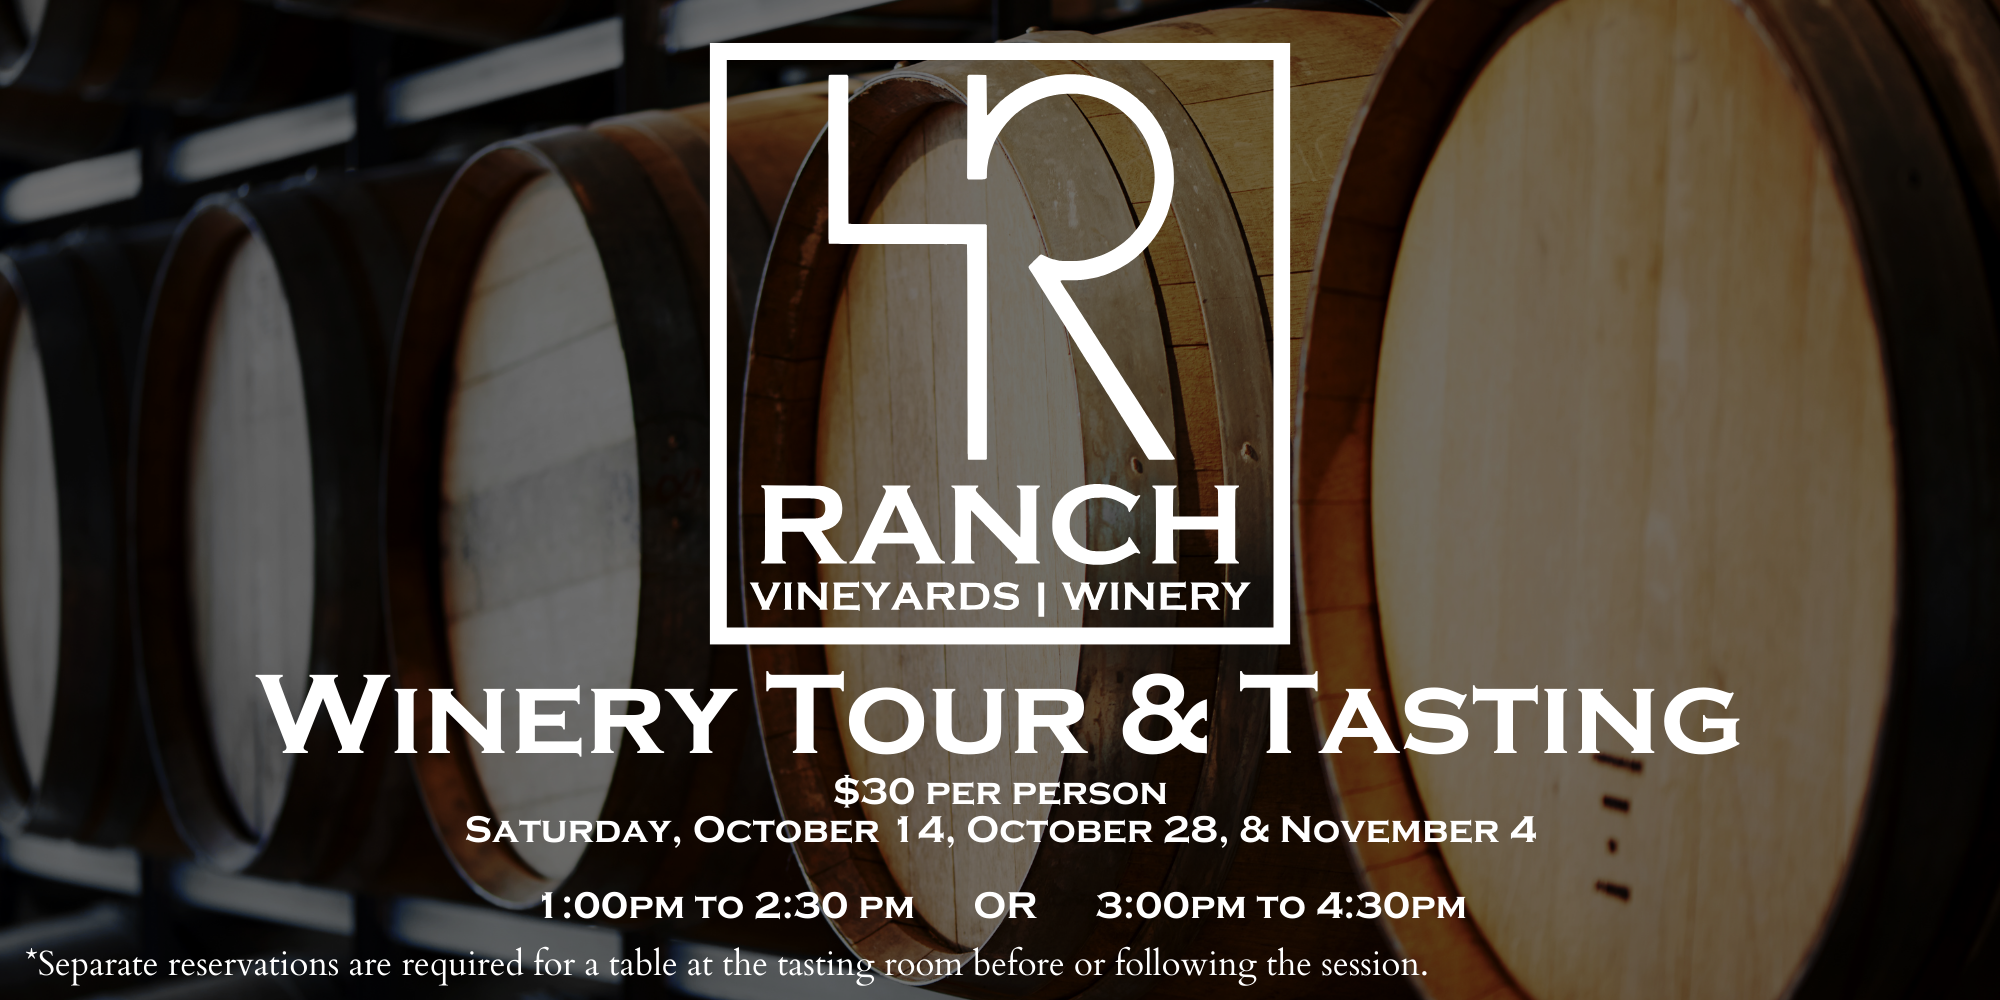 Winery Tour & Tasting at 4R in Muenster. Saturday, October 14, October 28, & November 4, from 1:00 to 3:30 pm or 3:00 to 4:30 pm